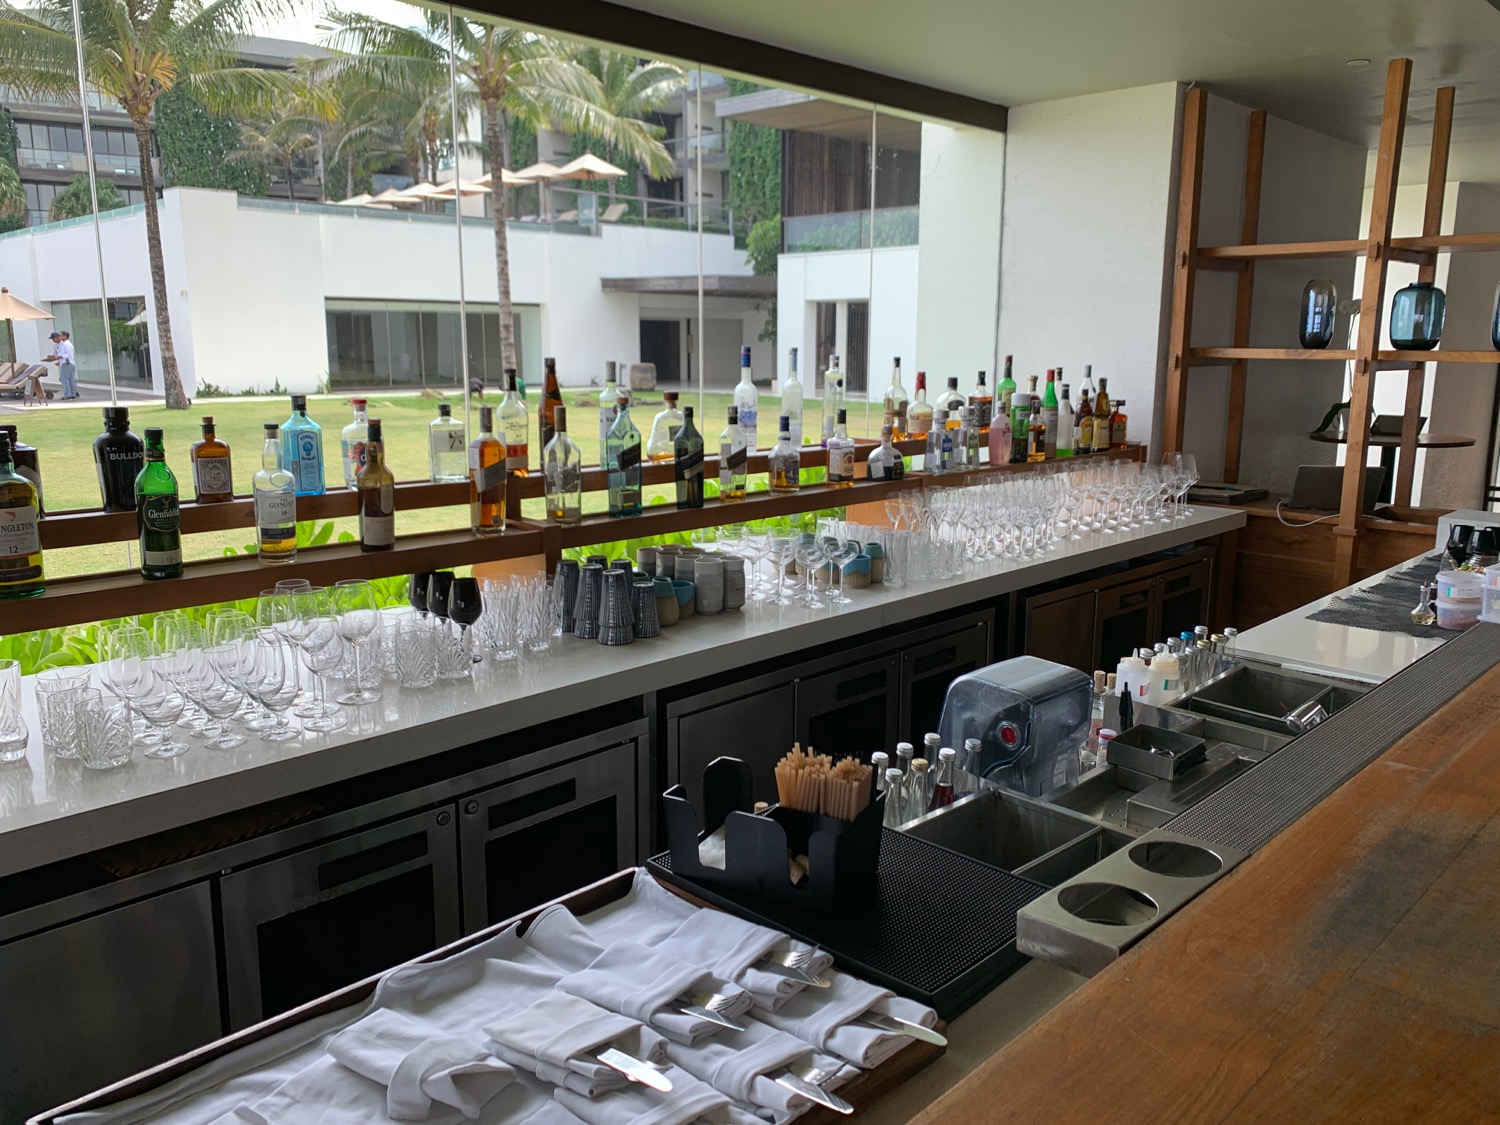 a bar with bottles and glasses